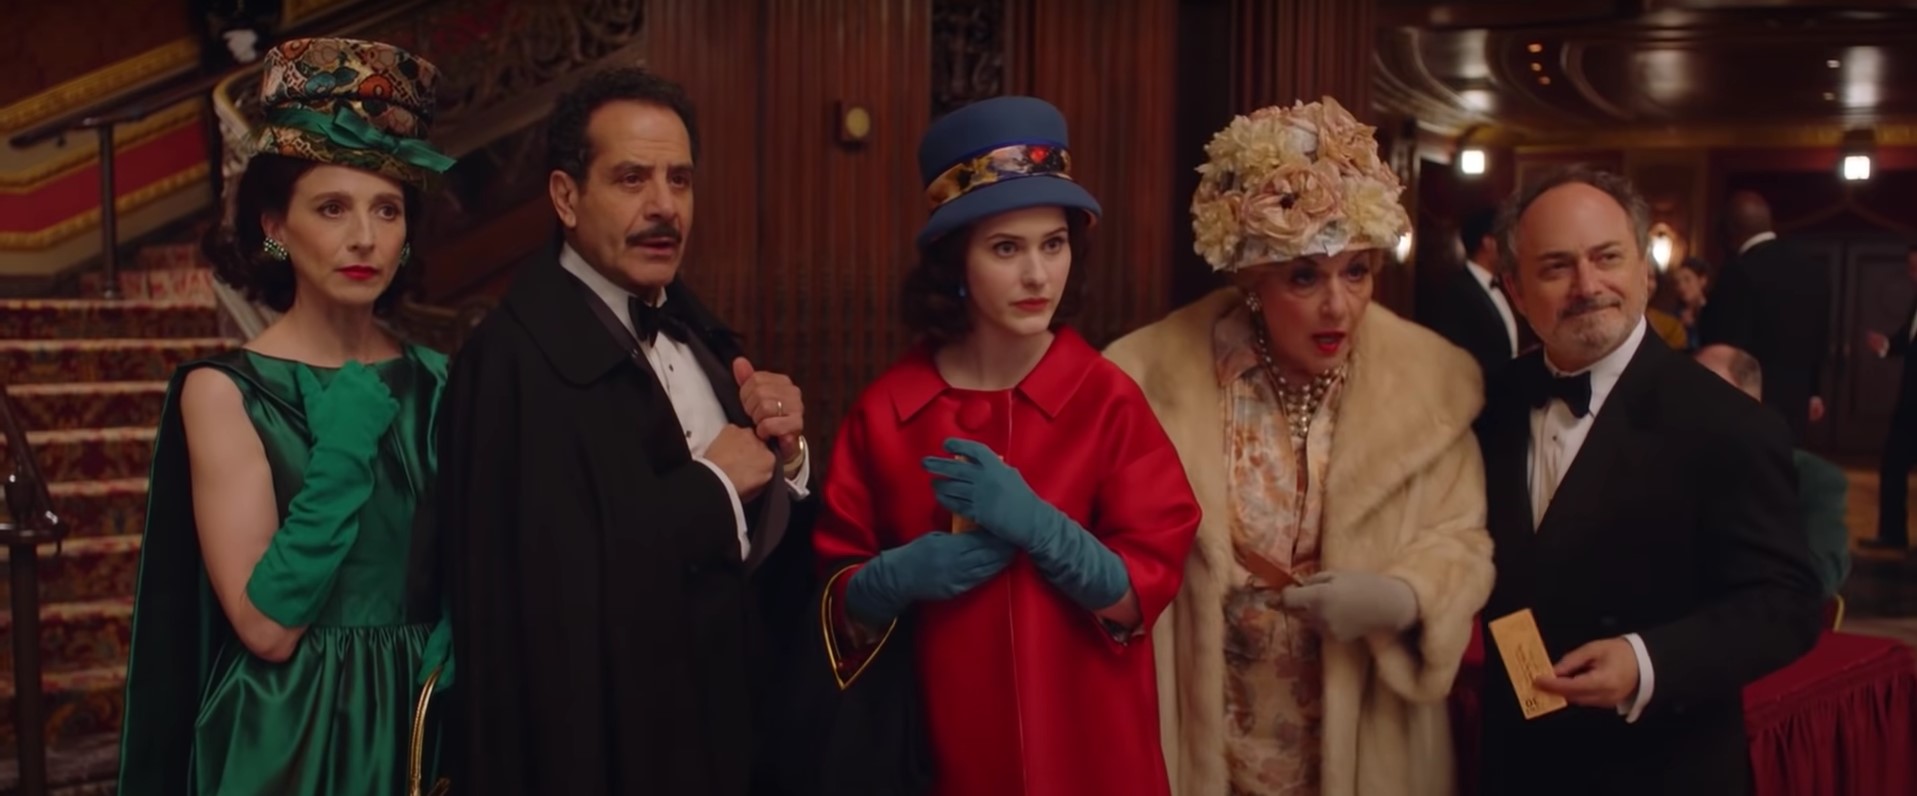 The Marvelous Mrs. Maisel Season 4 Episode 3 and 4 Recap and Ending Explained - ThiruttuVCD